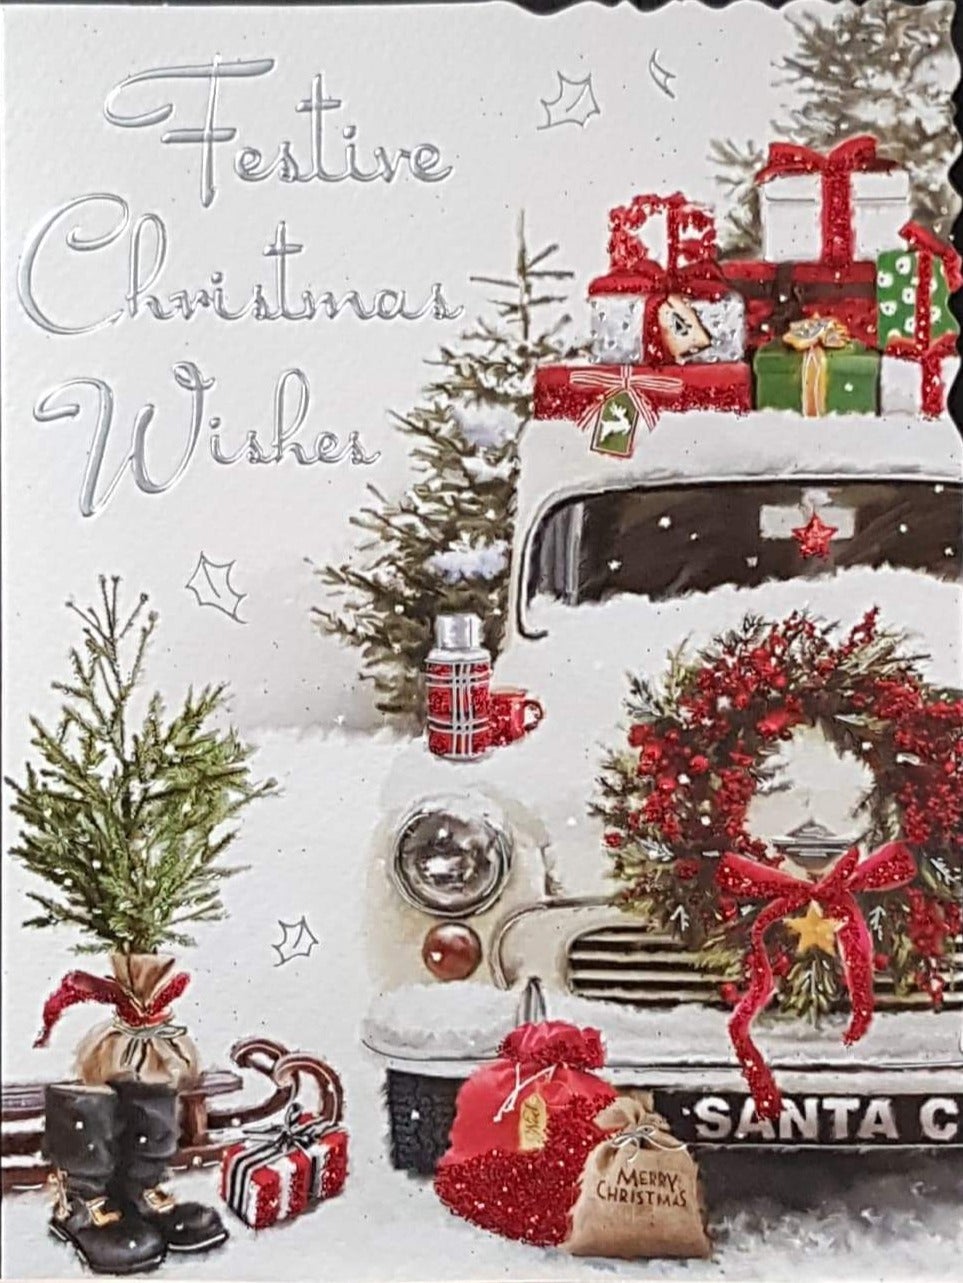 General Christmas Card - Festive Christmas Wishes & White Car & Gifts Decorated